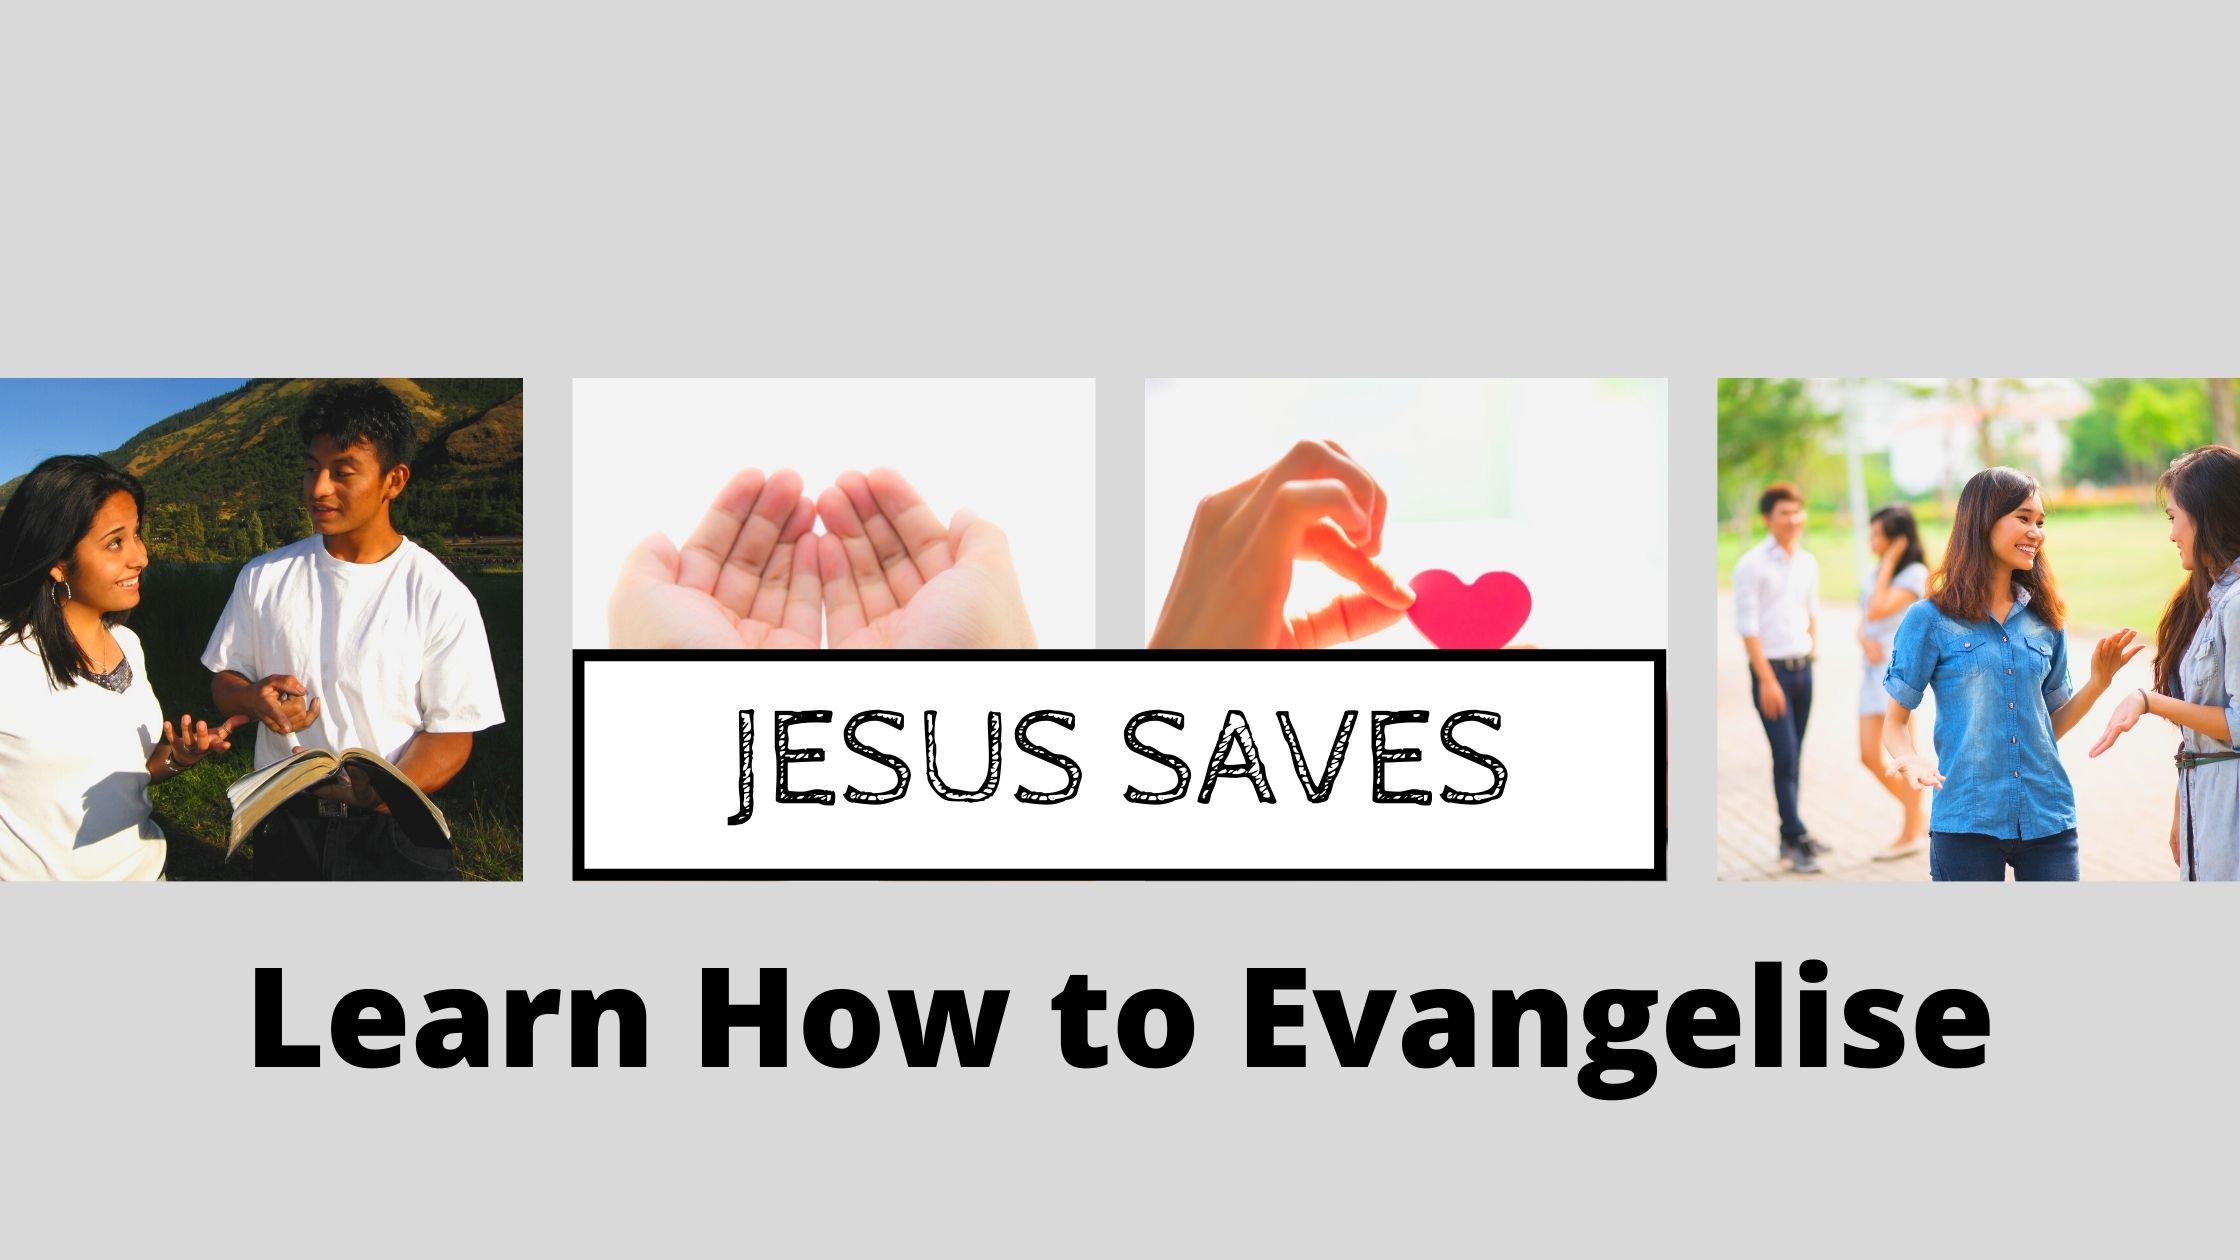 Learn how to evangelise